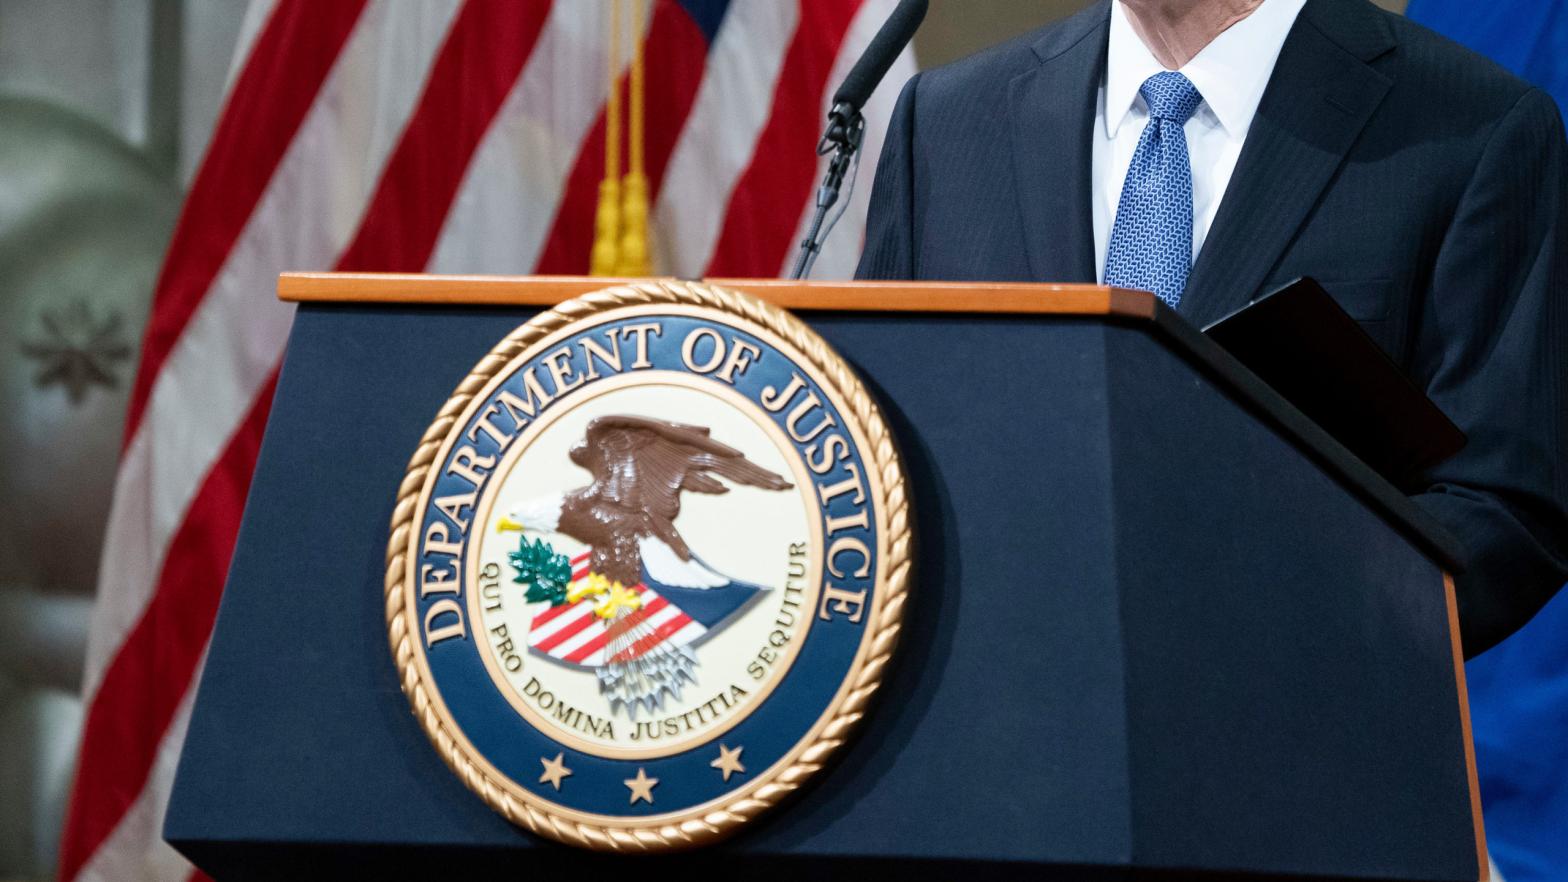 The seal of the U.S. Department of Justice as Attorney General Merrick Garland addresses staff on his first day in March 2021. (Photo: Kevin Dietsch/Pool, Getty Images)